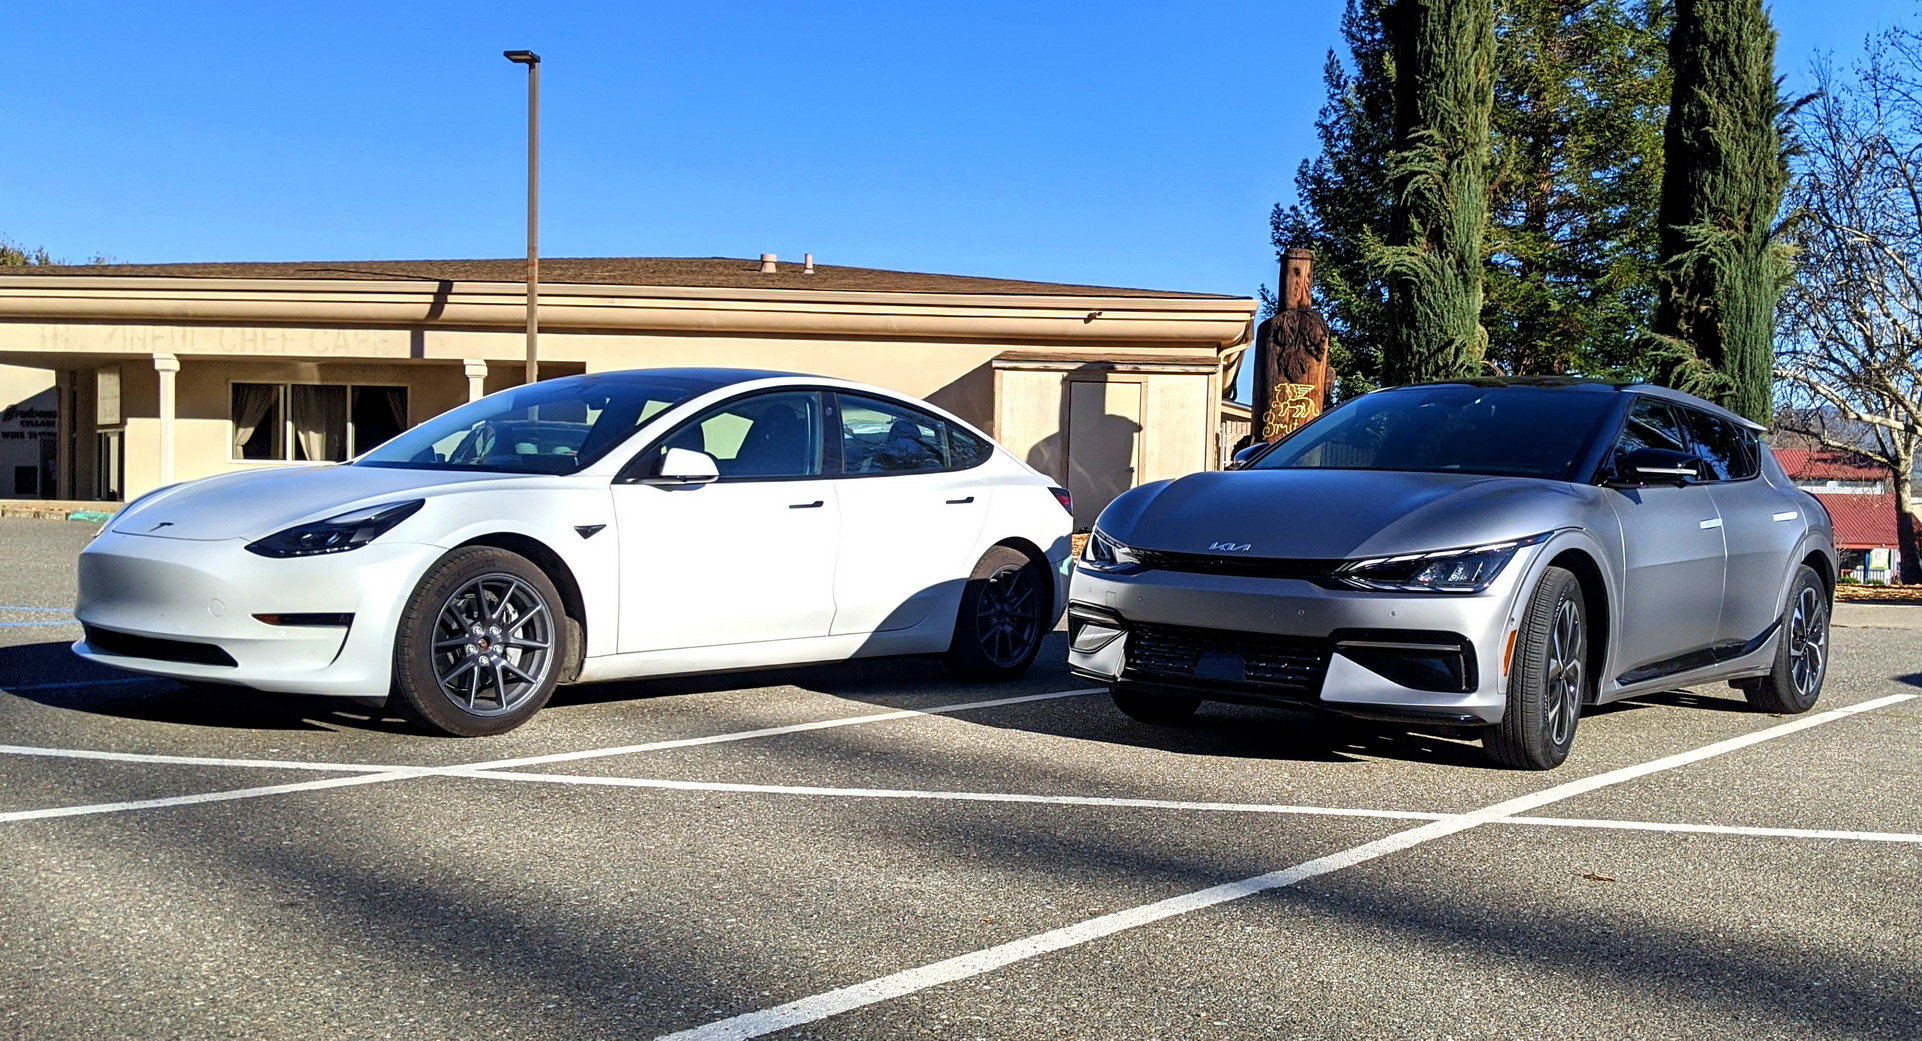 Check Out The New Kia EV6 Next To A Tesla Model 3 And See How They